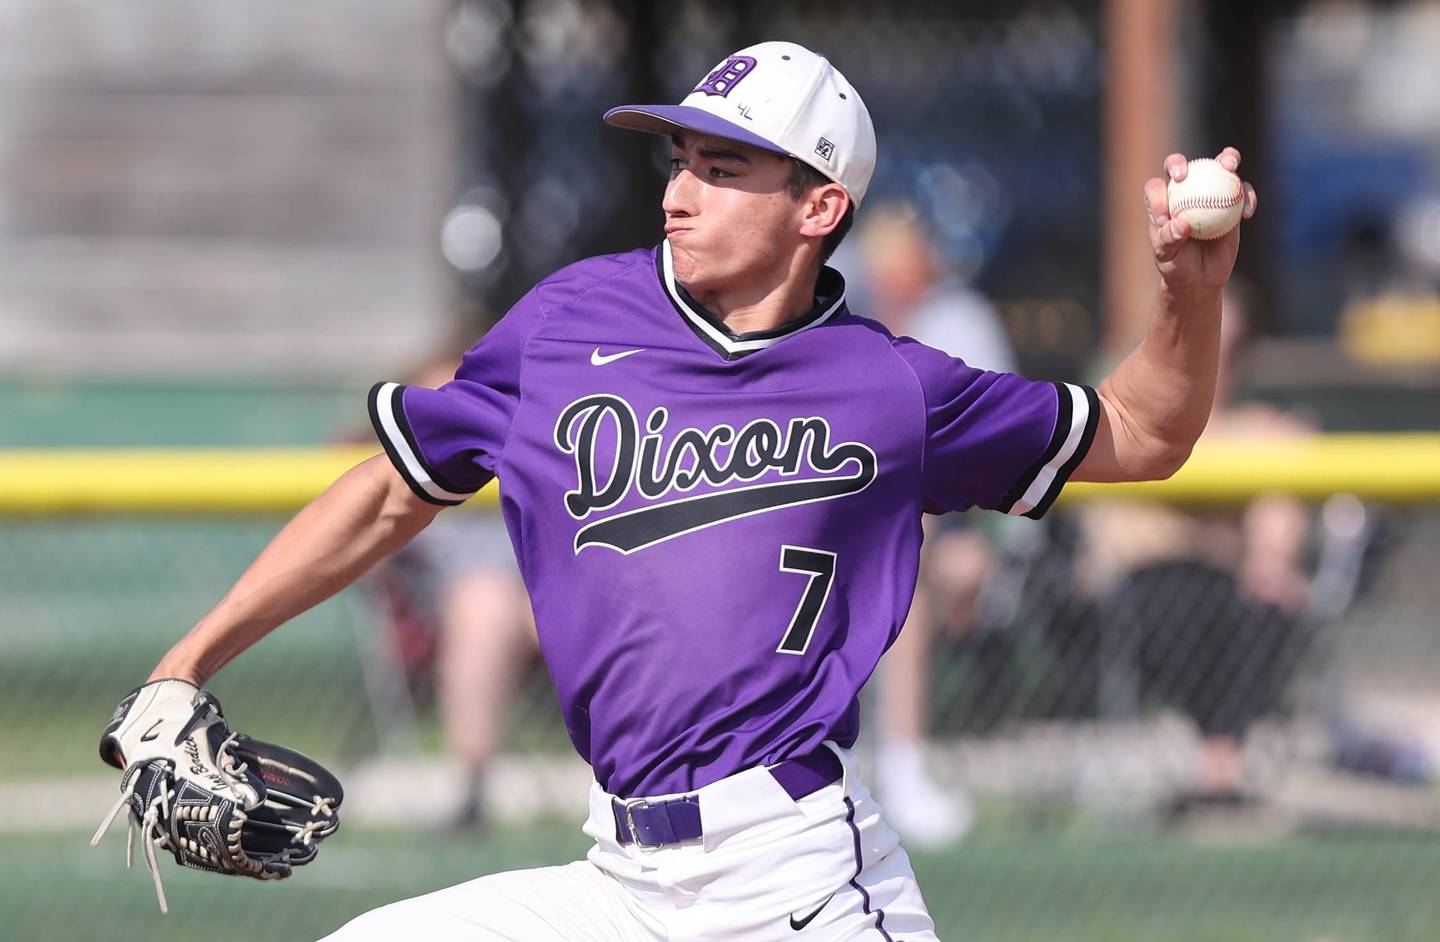 Dixon's Gage Burdick delivers a pitch during their game against Sycamore Thursday, May 19, 2022, at the Sycamore Community Sports Complex.